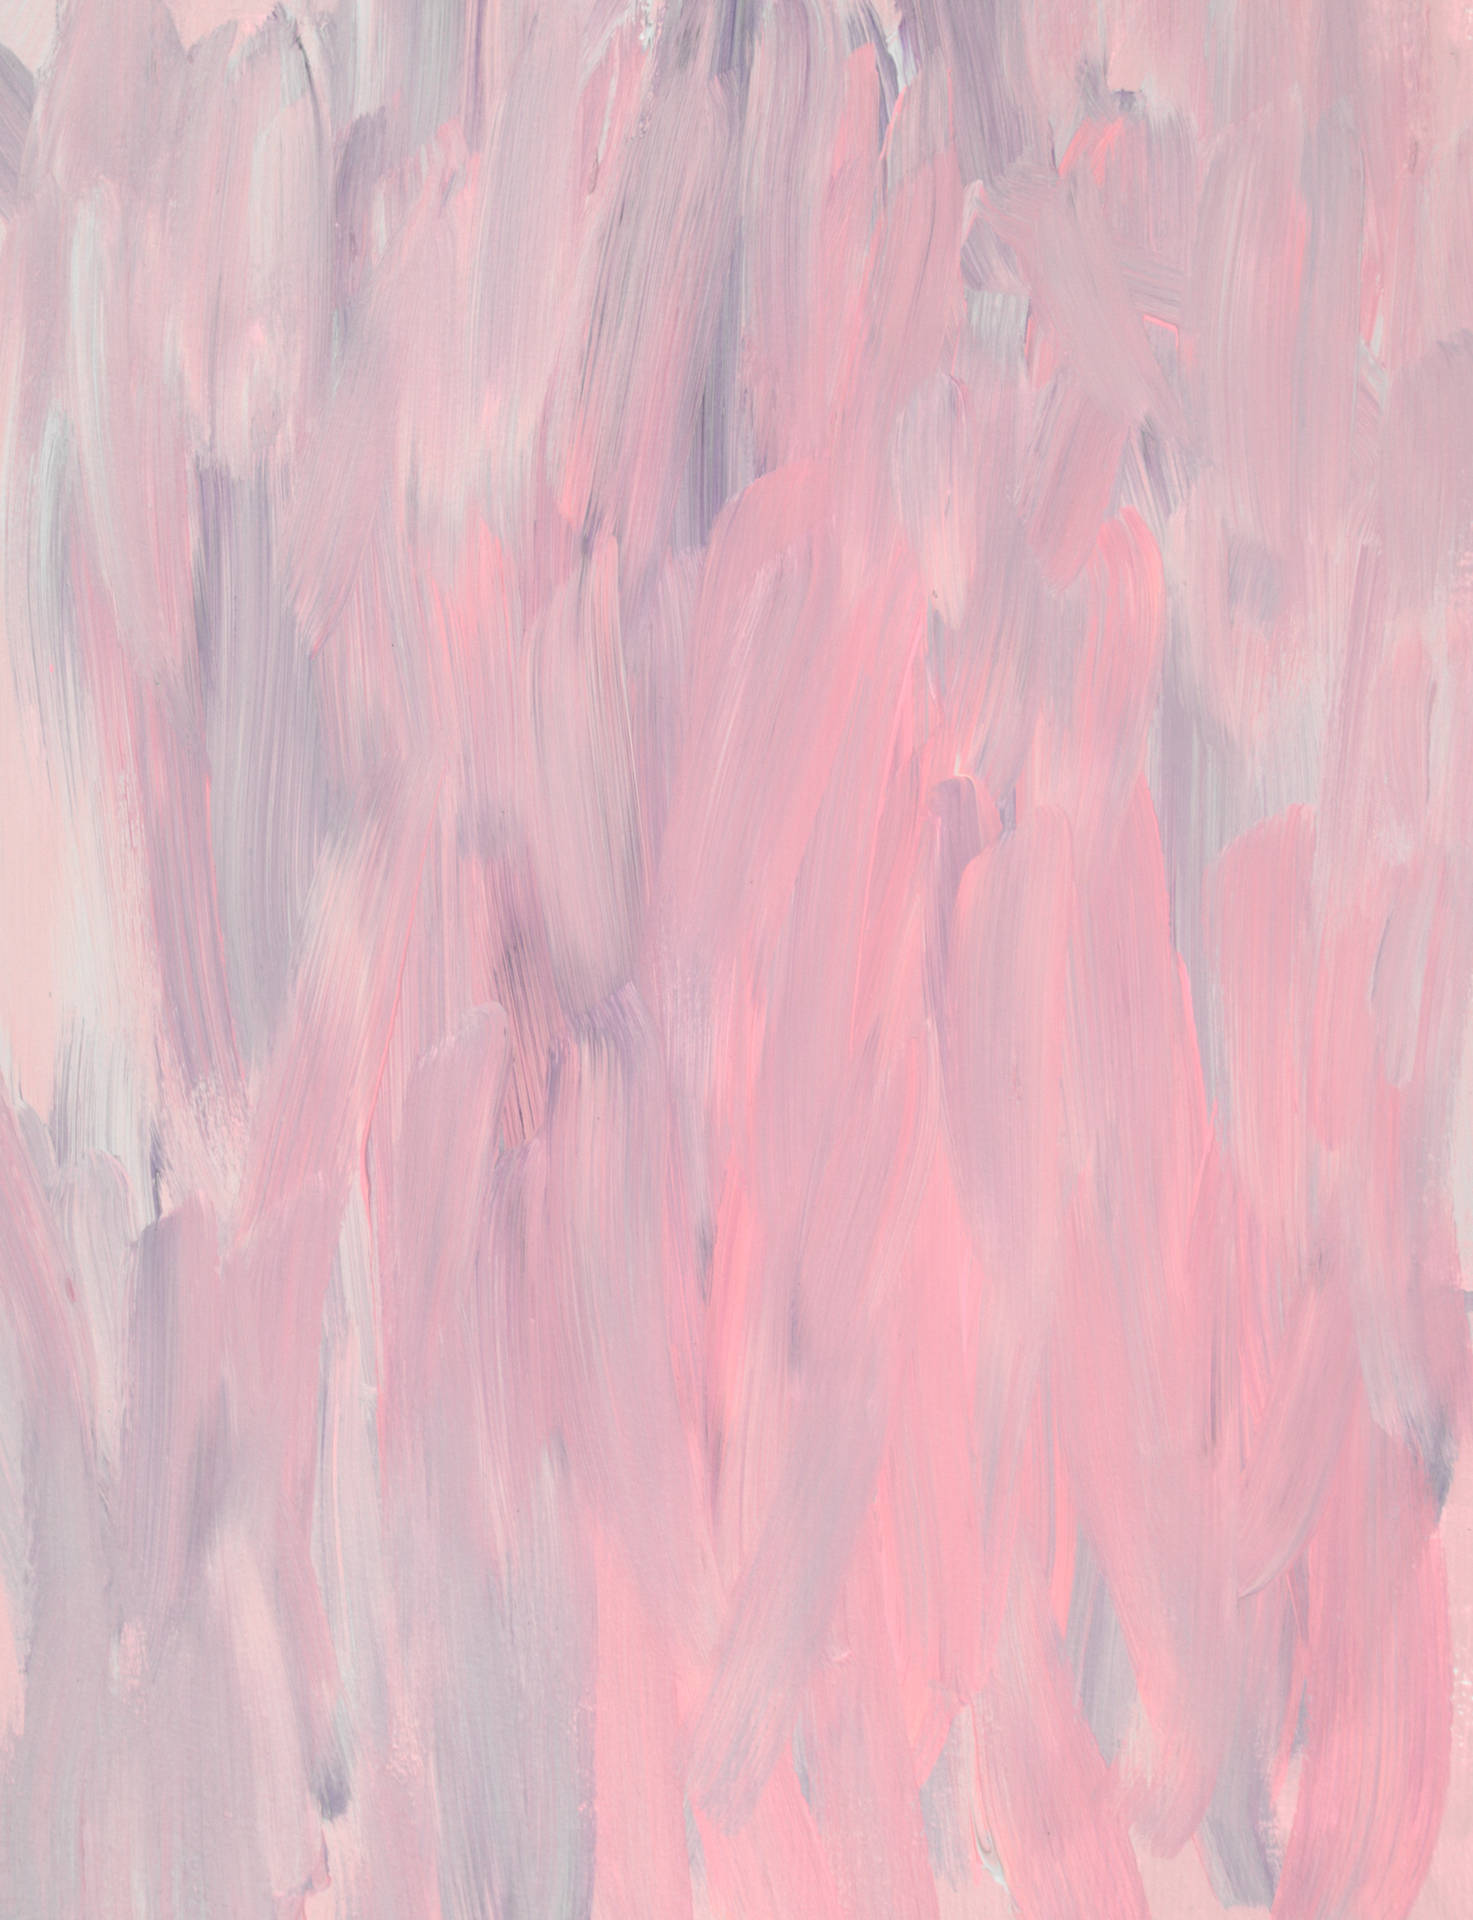 Pink And White Cute Pastel Aesthetic Painting